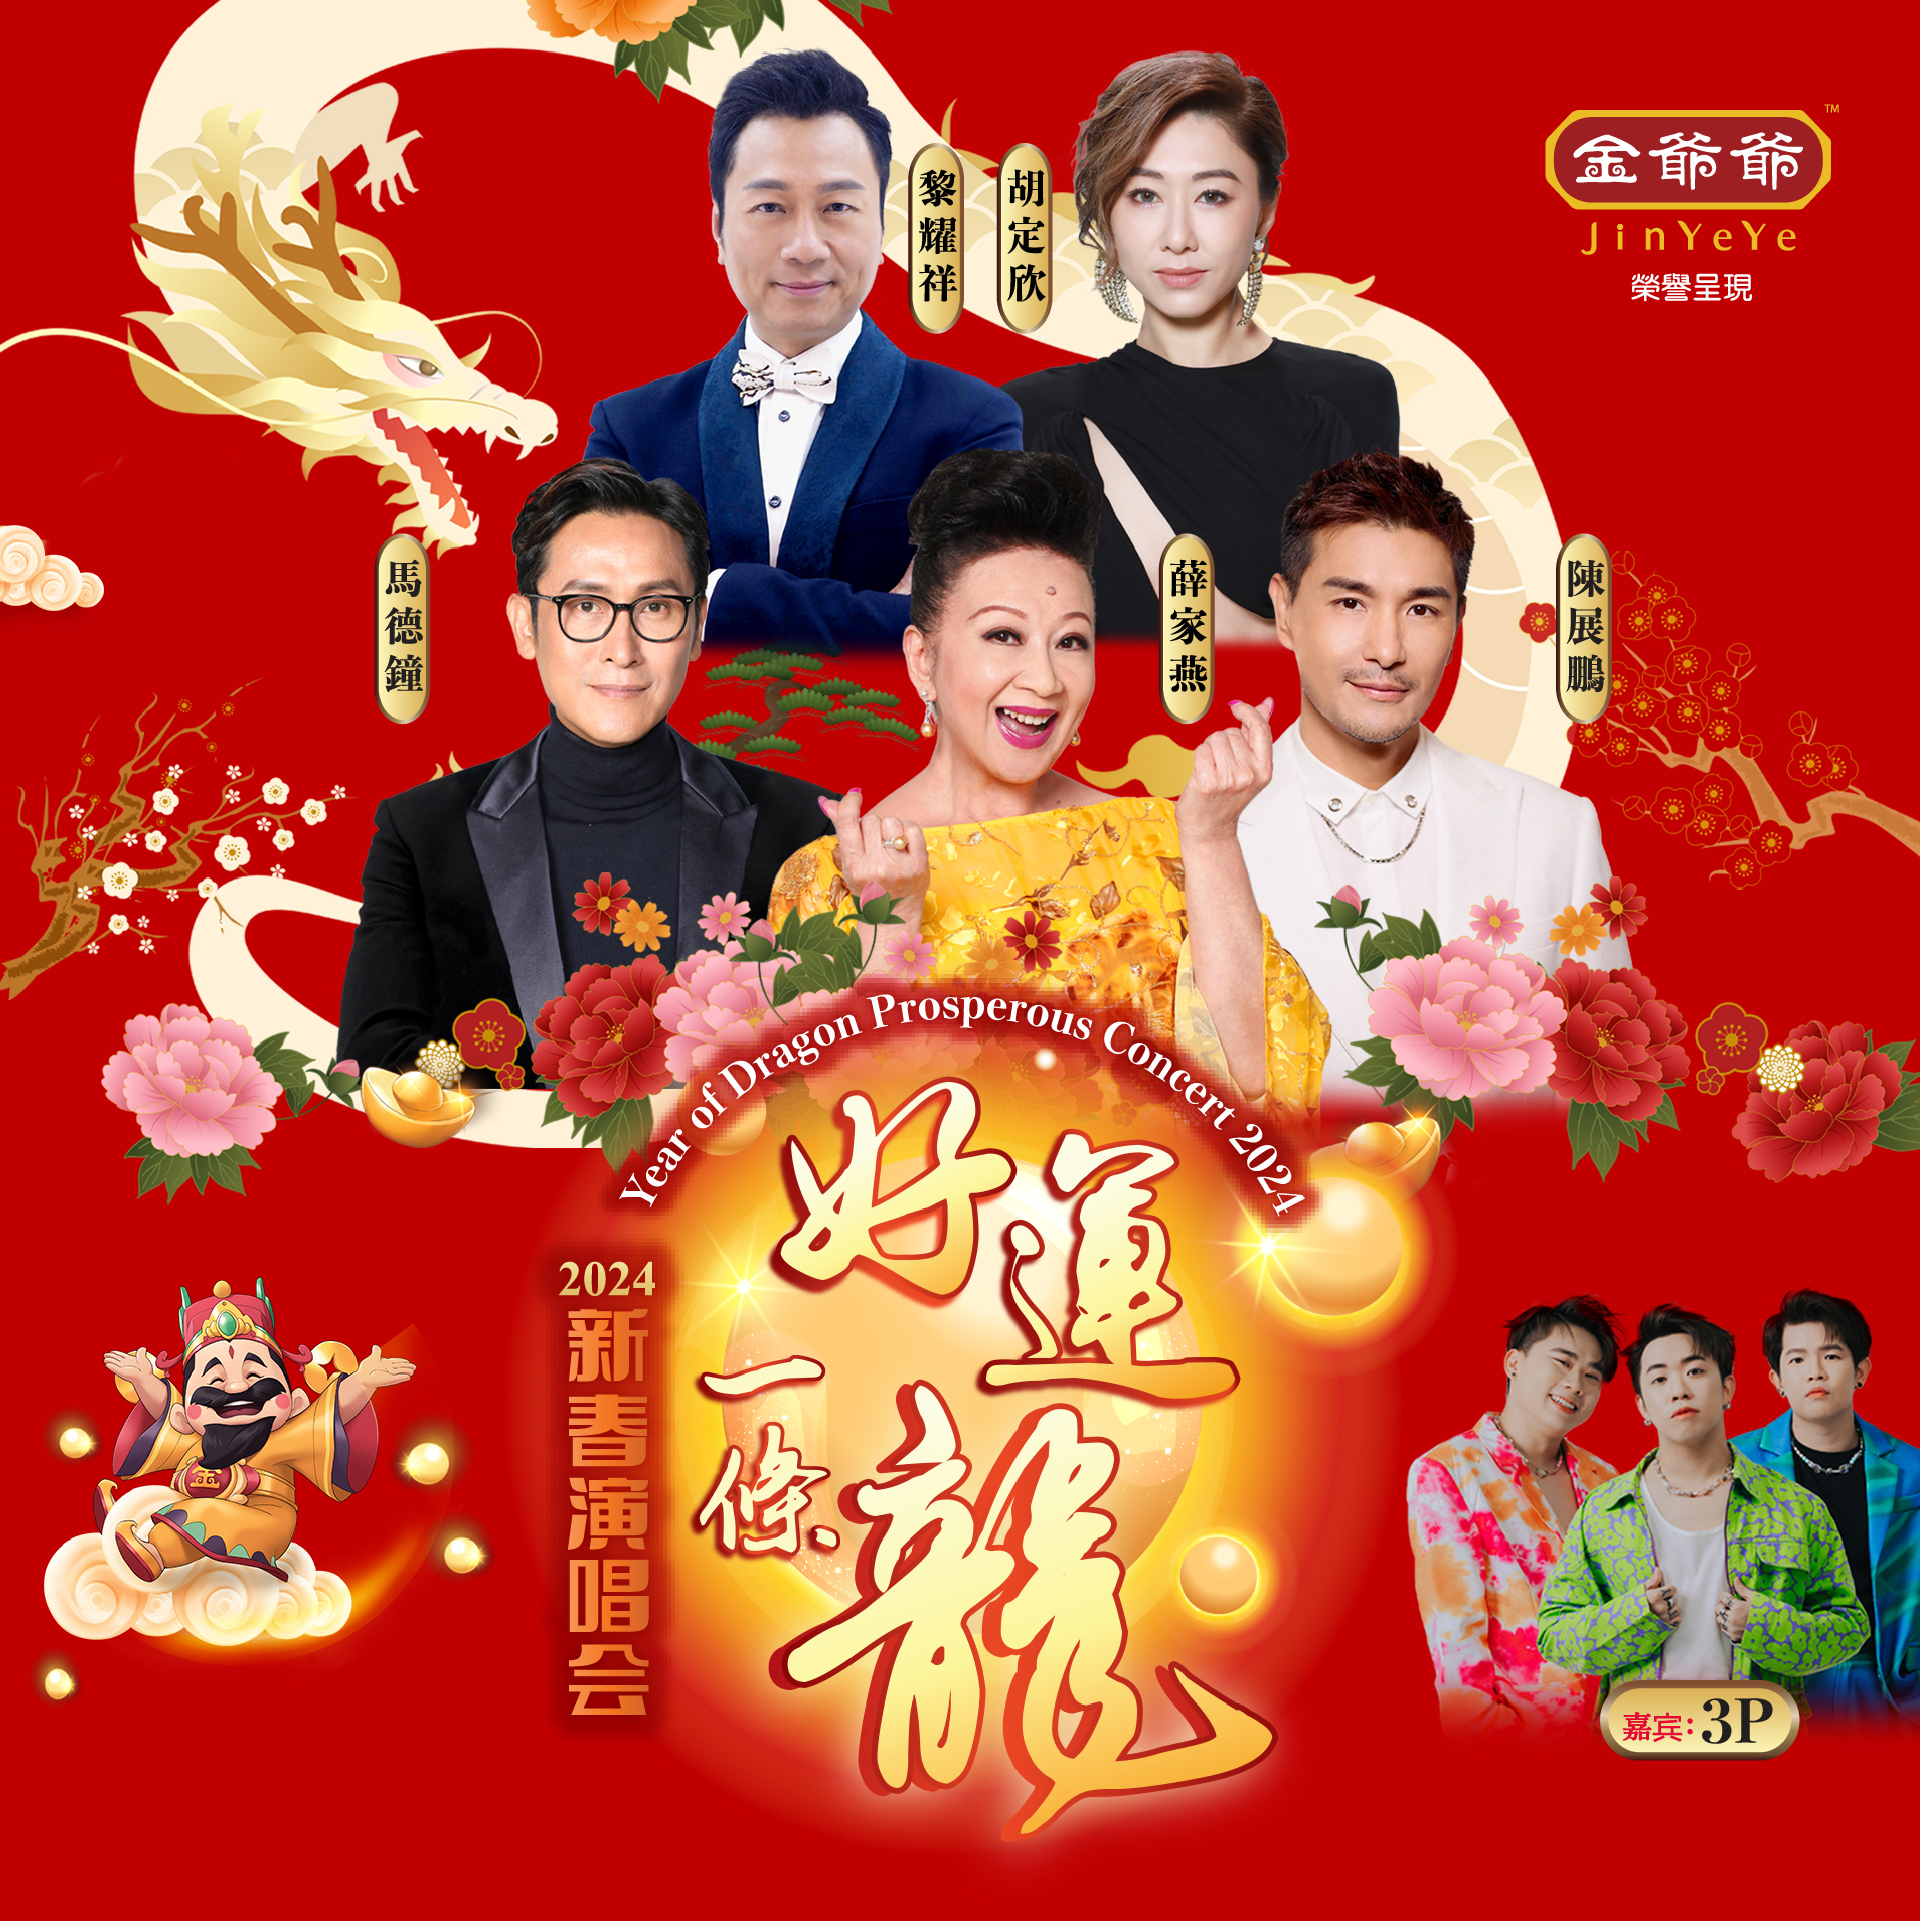 Year of Dragon Prosperous Concert 2024